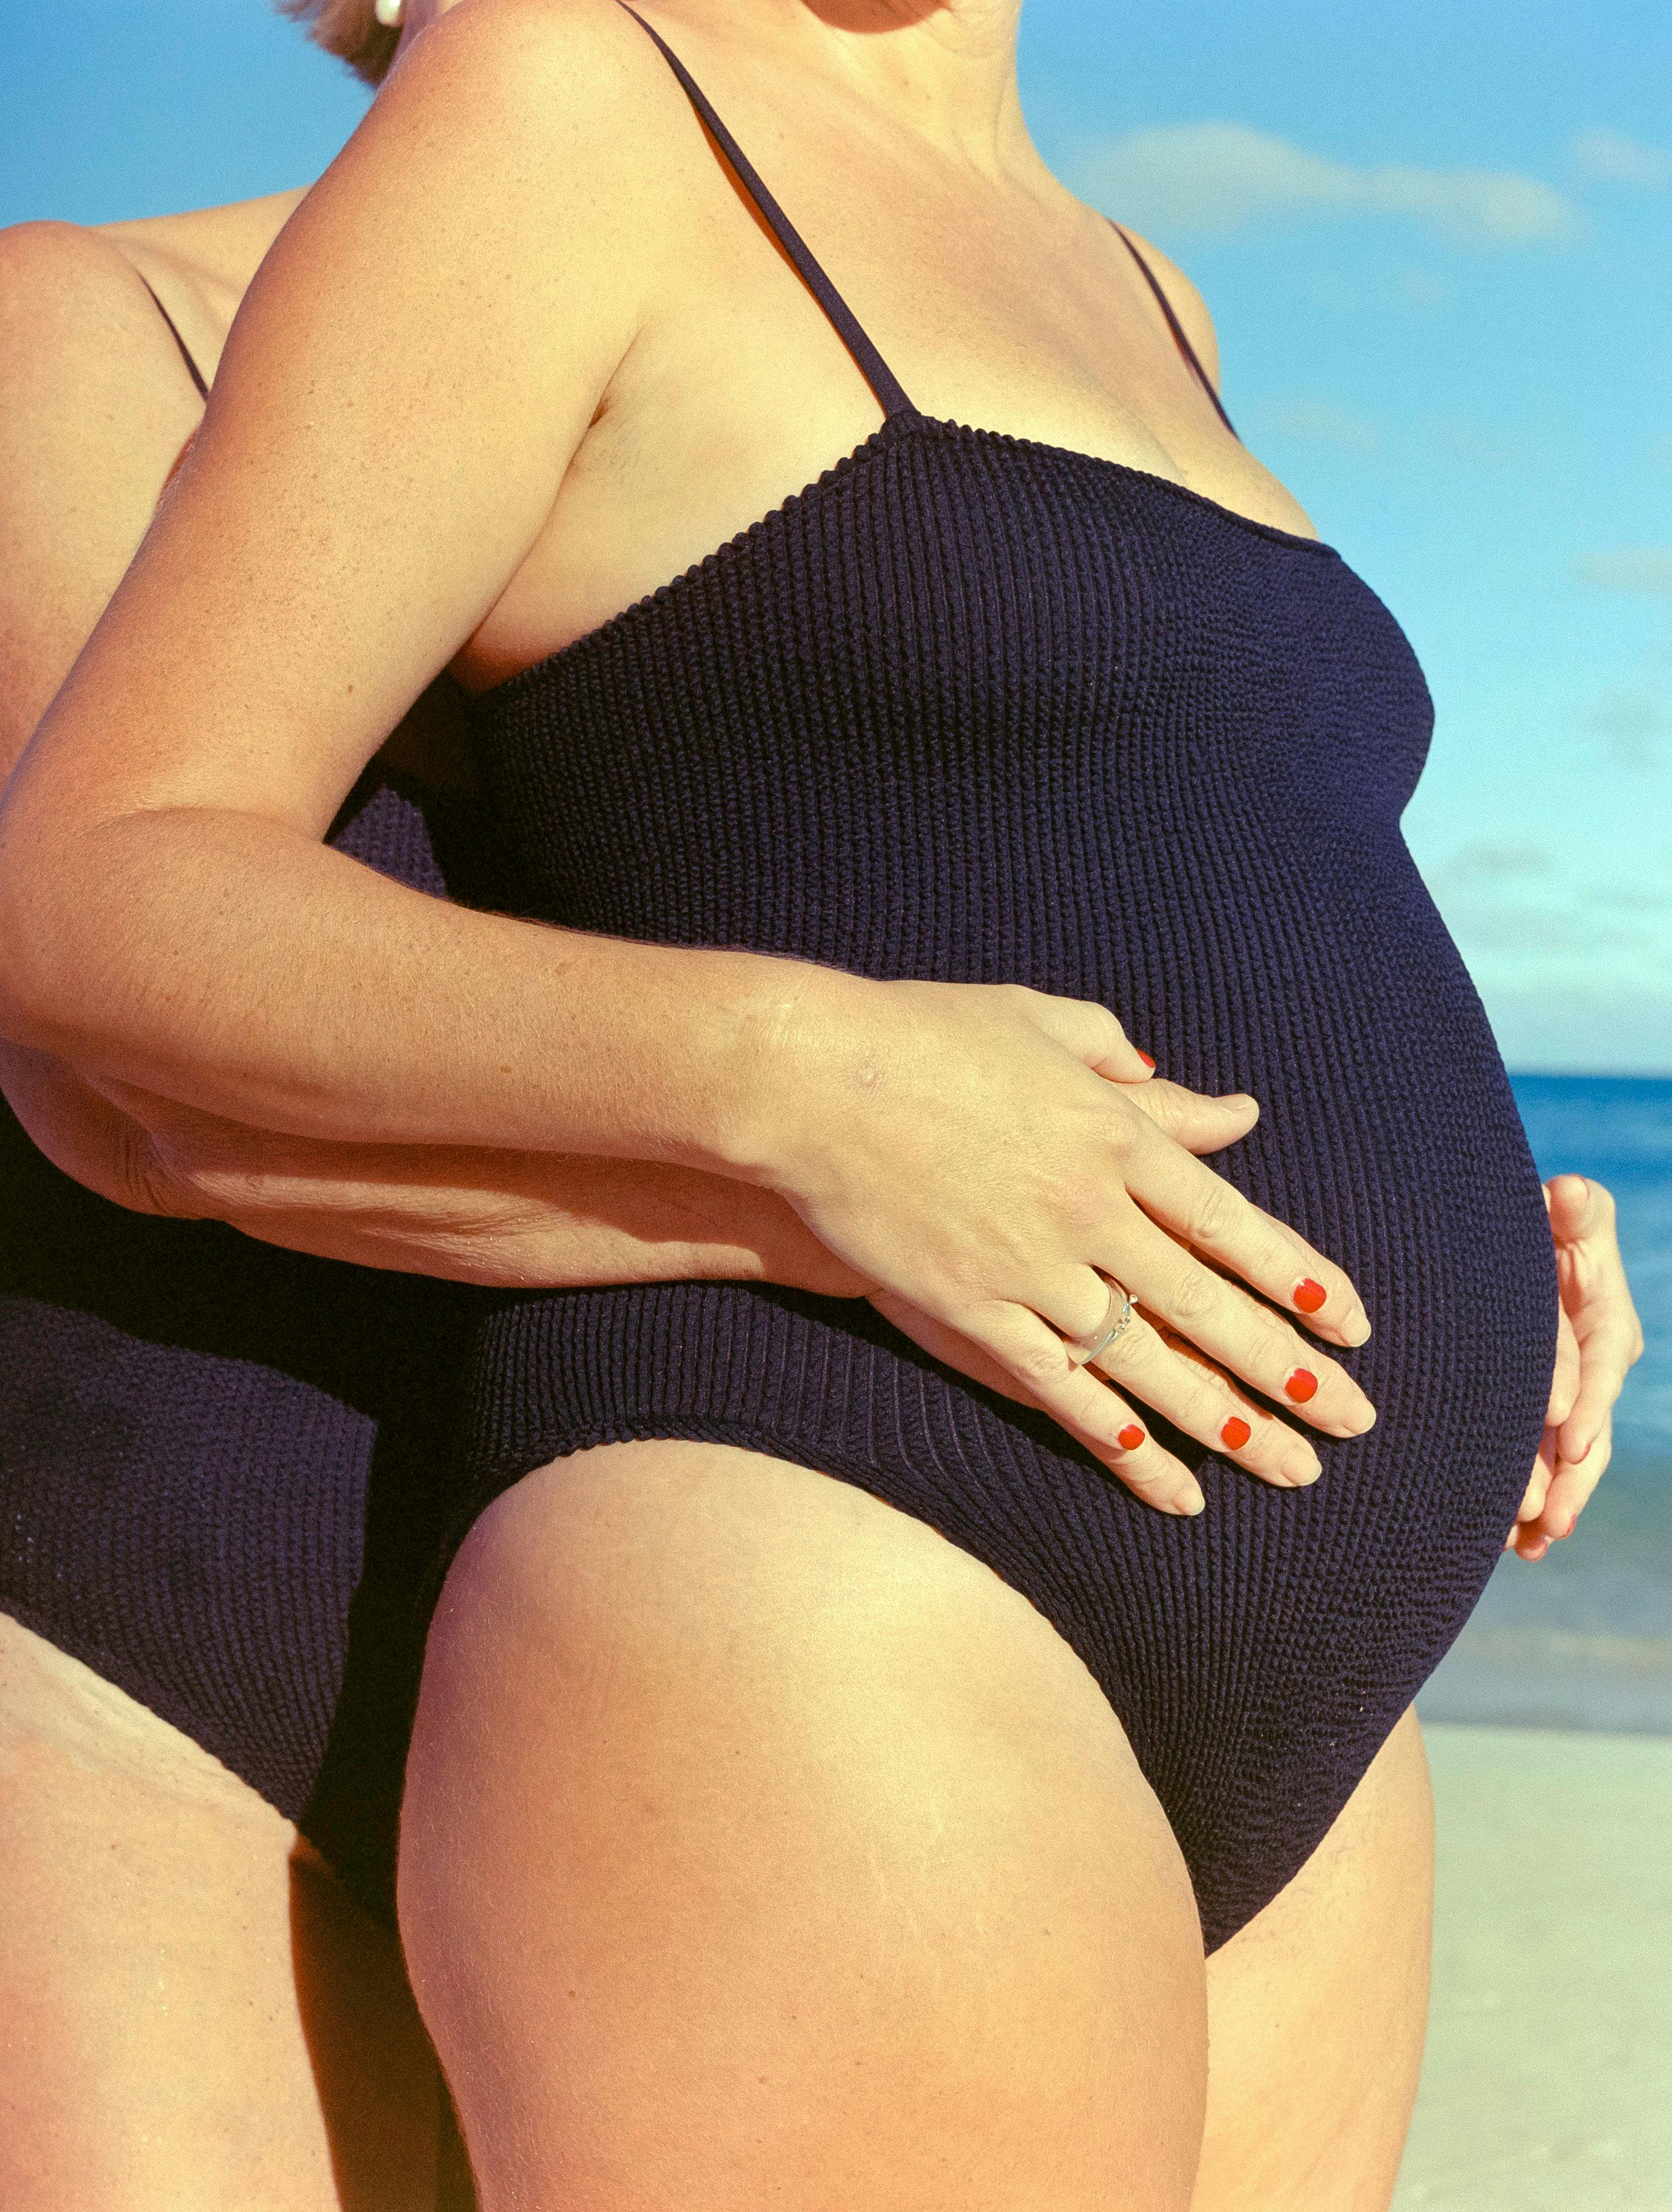 Elise with pregnancy bump wearing black swimsuit